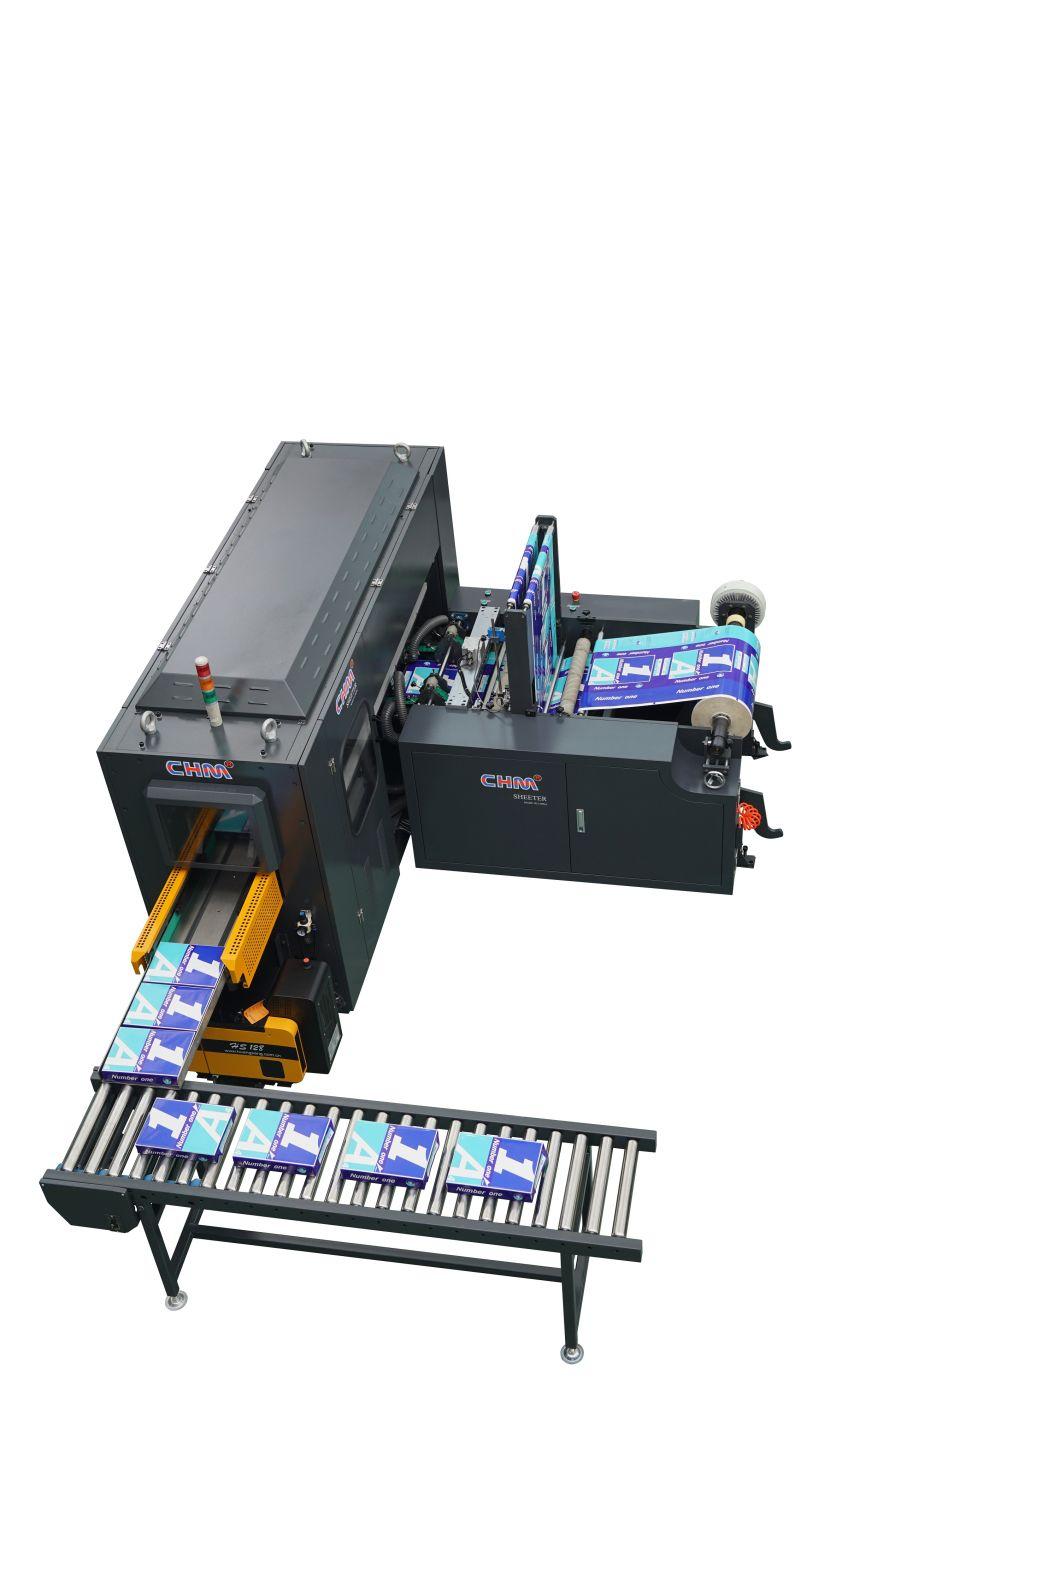 A5 Paper Cutting and Packing Machine